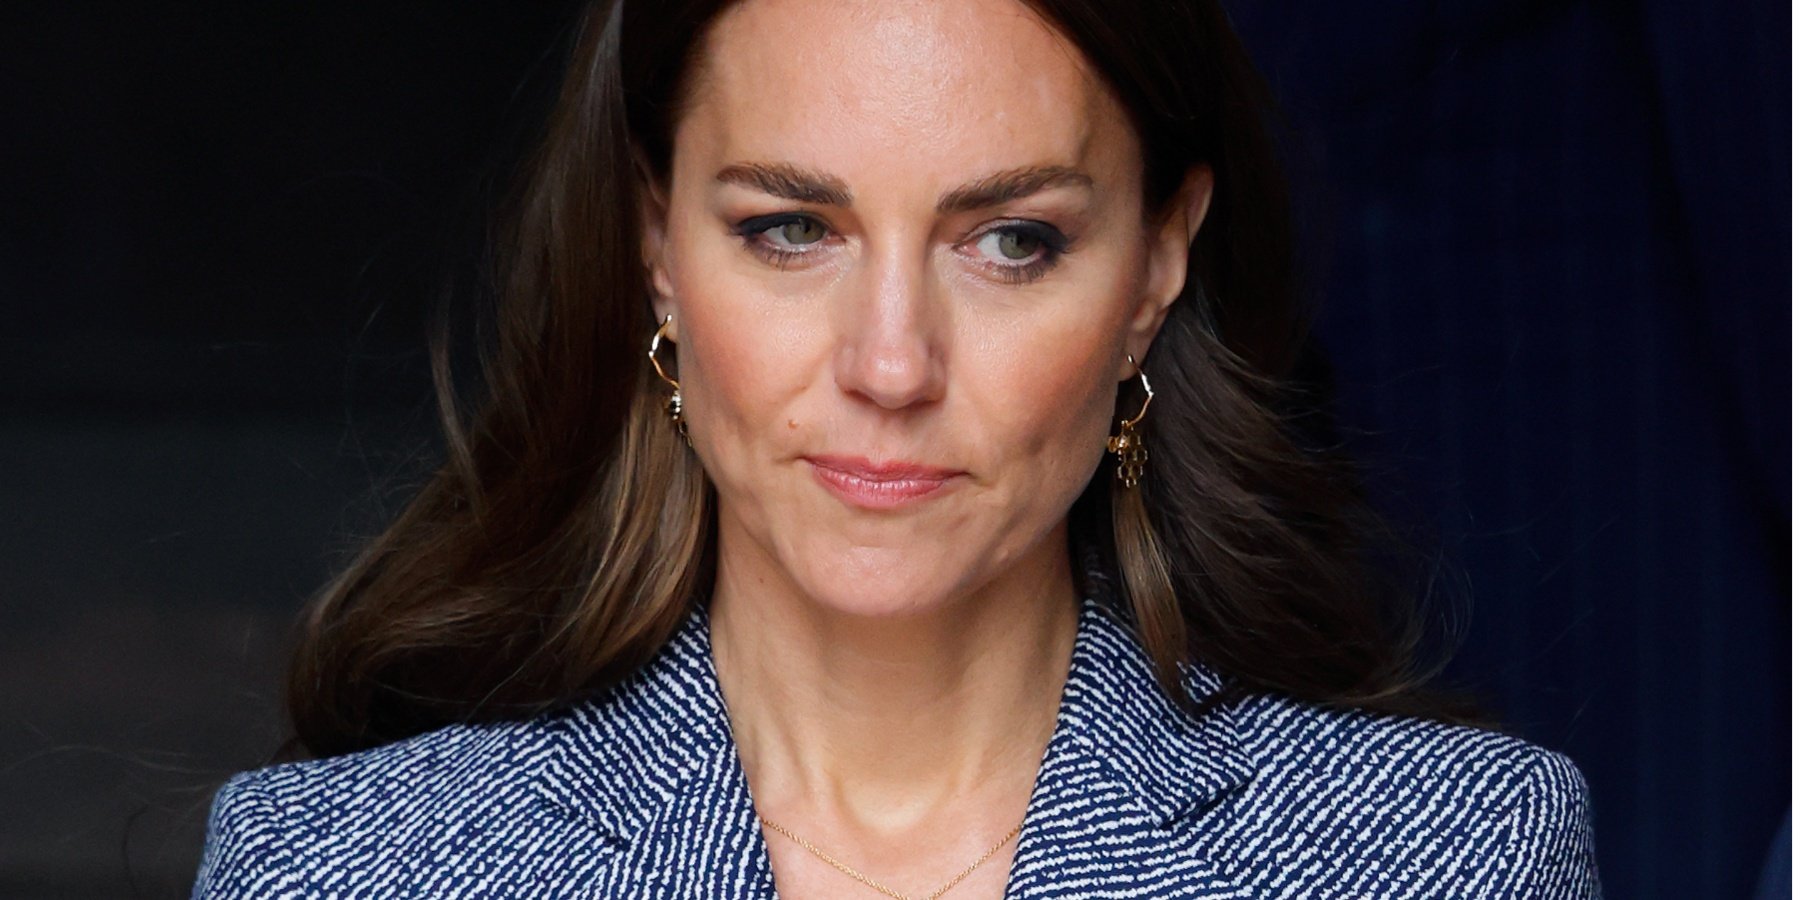 Kate Middleton ‘Bullied’ by Press as Palace Pressured to Reveal Health Details: Editor